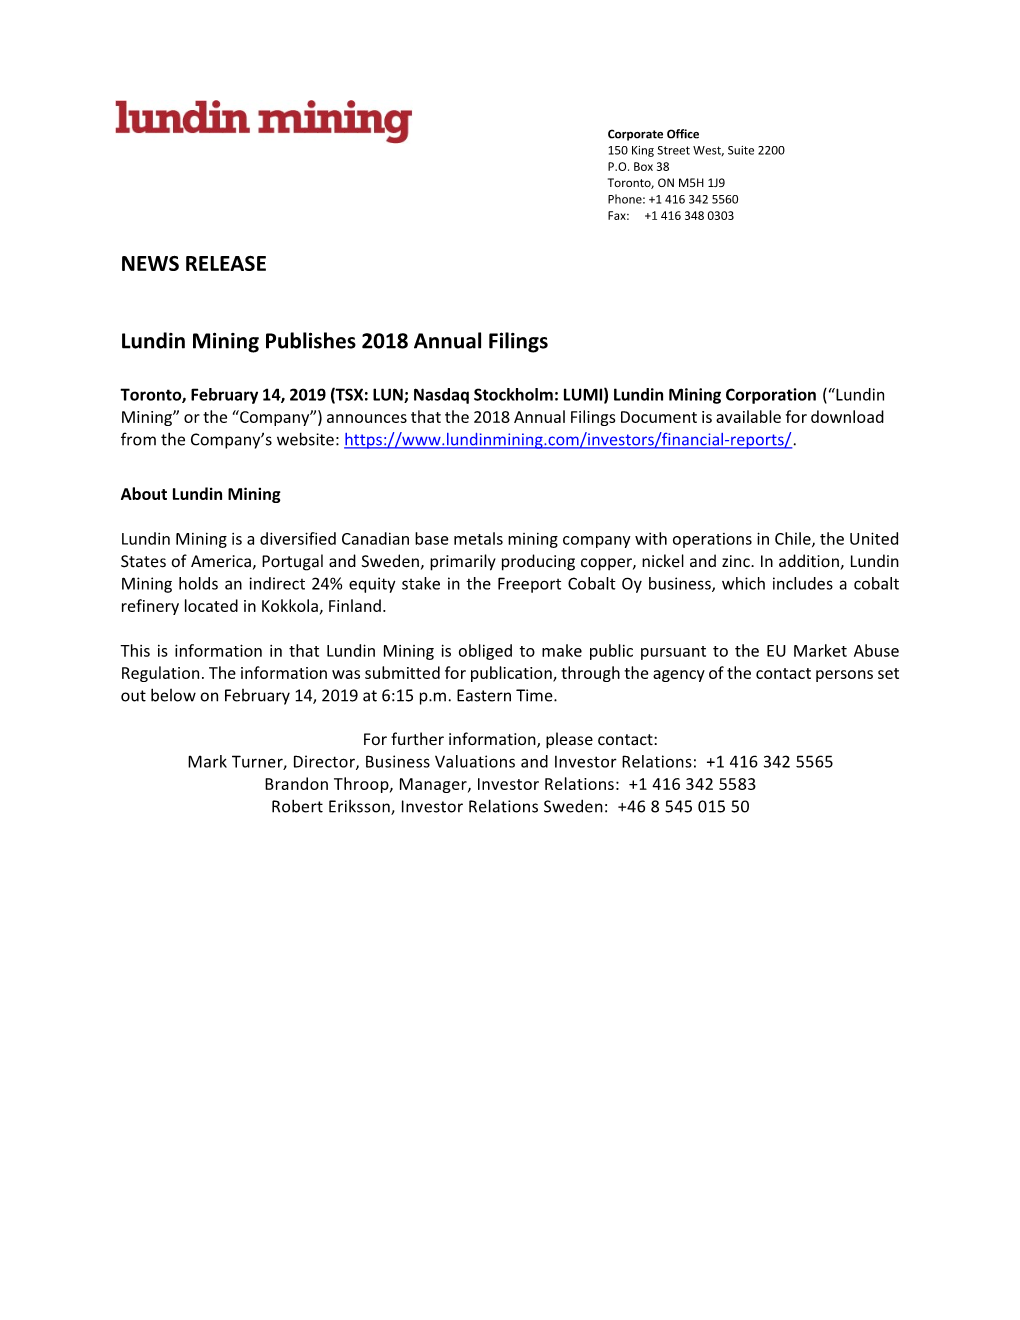 NEWS RELEASE Lundin Mining Publishes 2018 Annual Filings